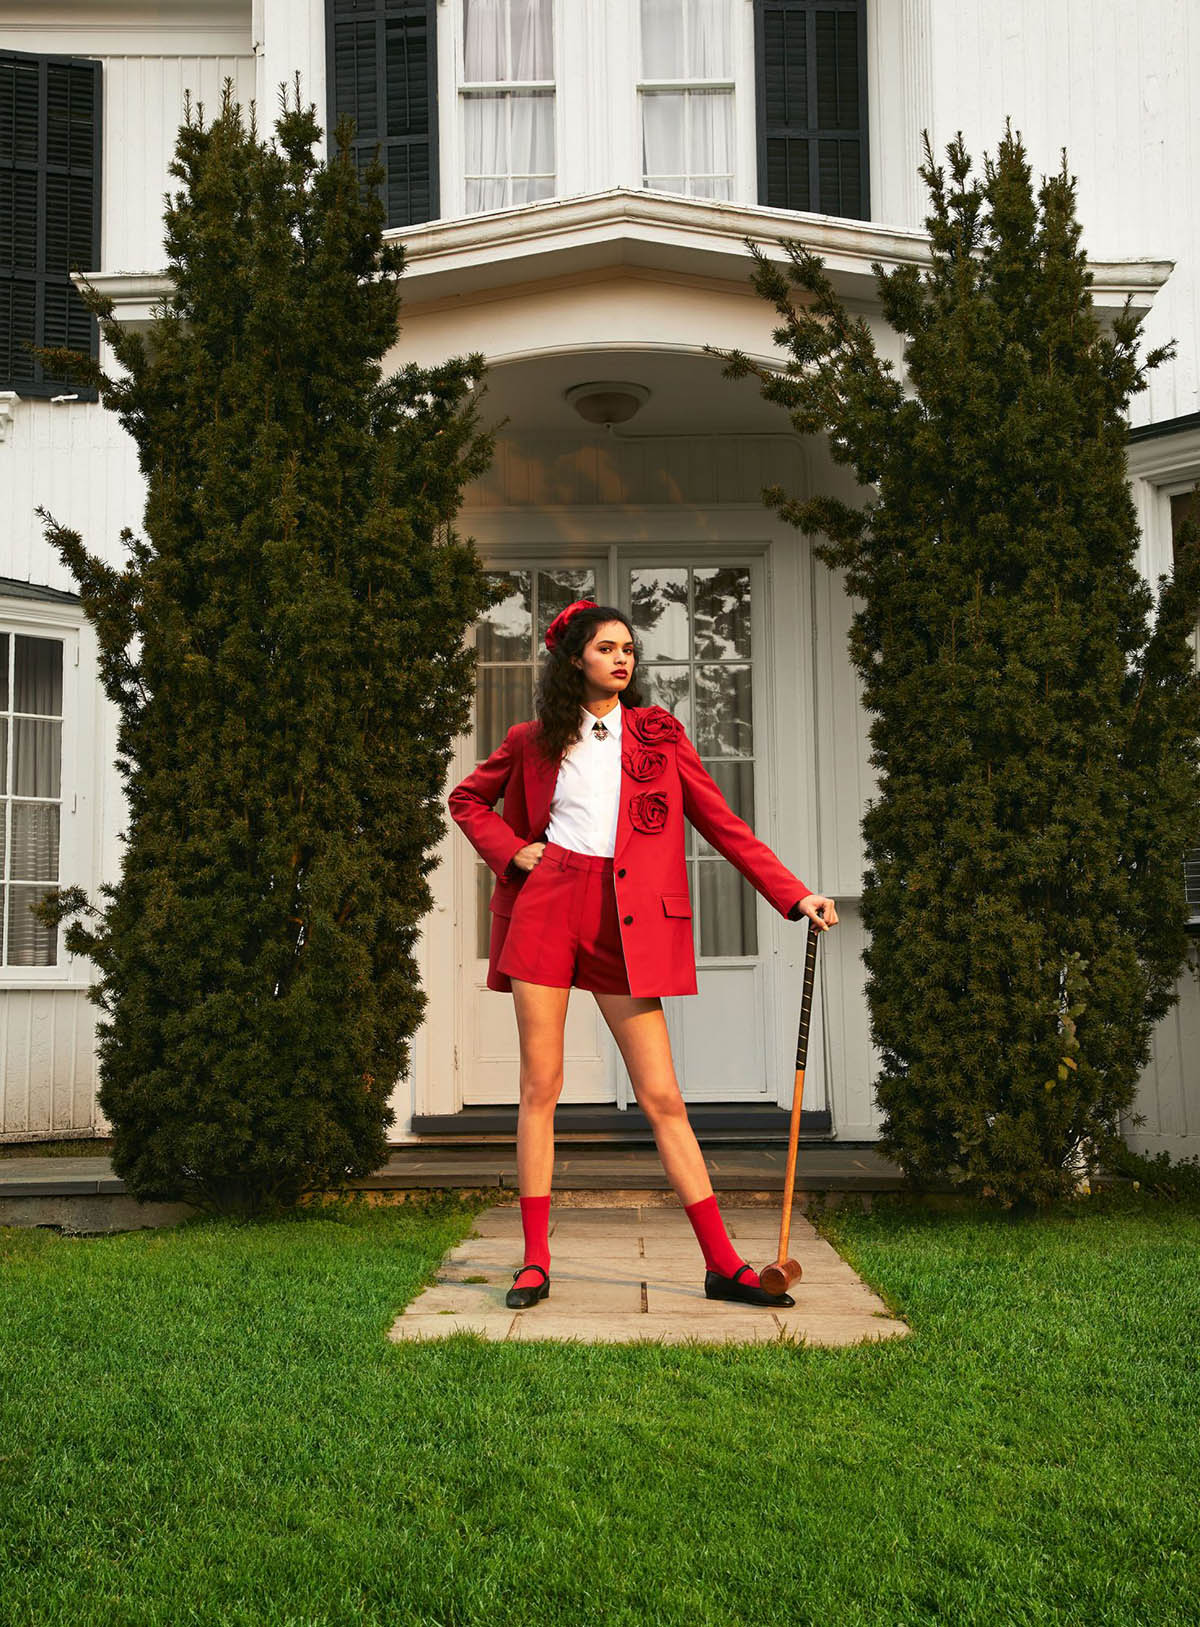 Aira Ferreira by Mark Lim for InStyle US June 2021